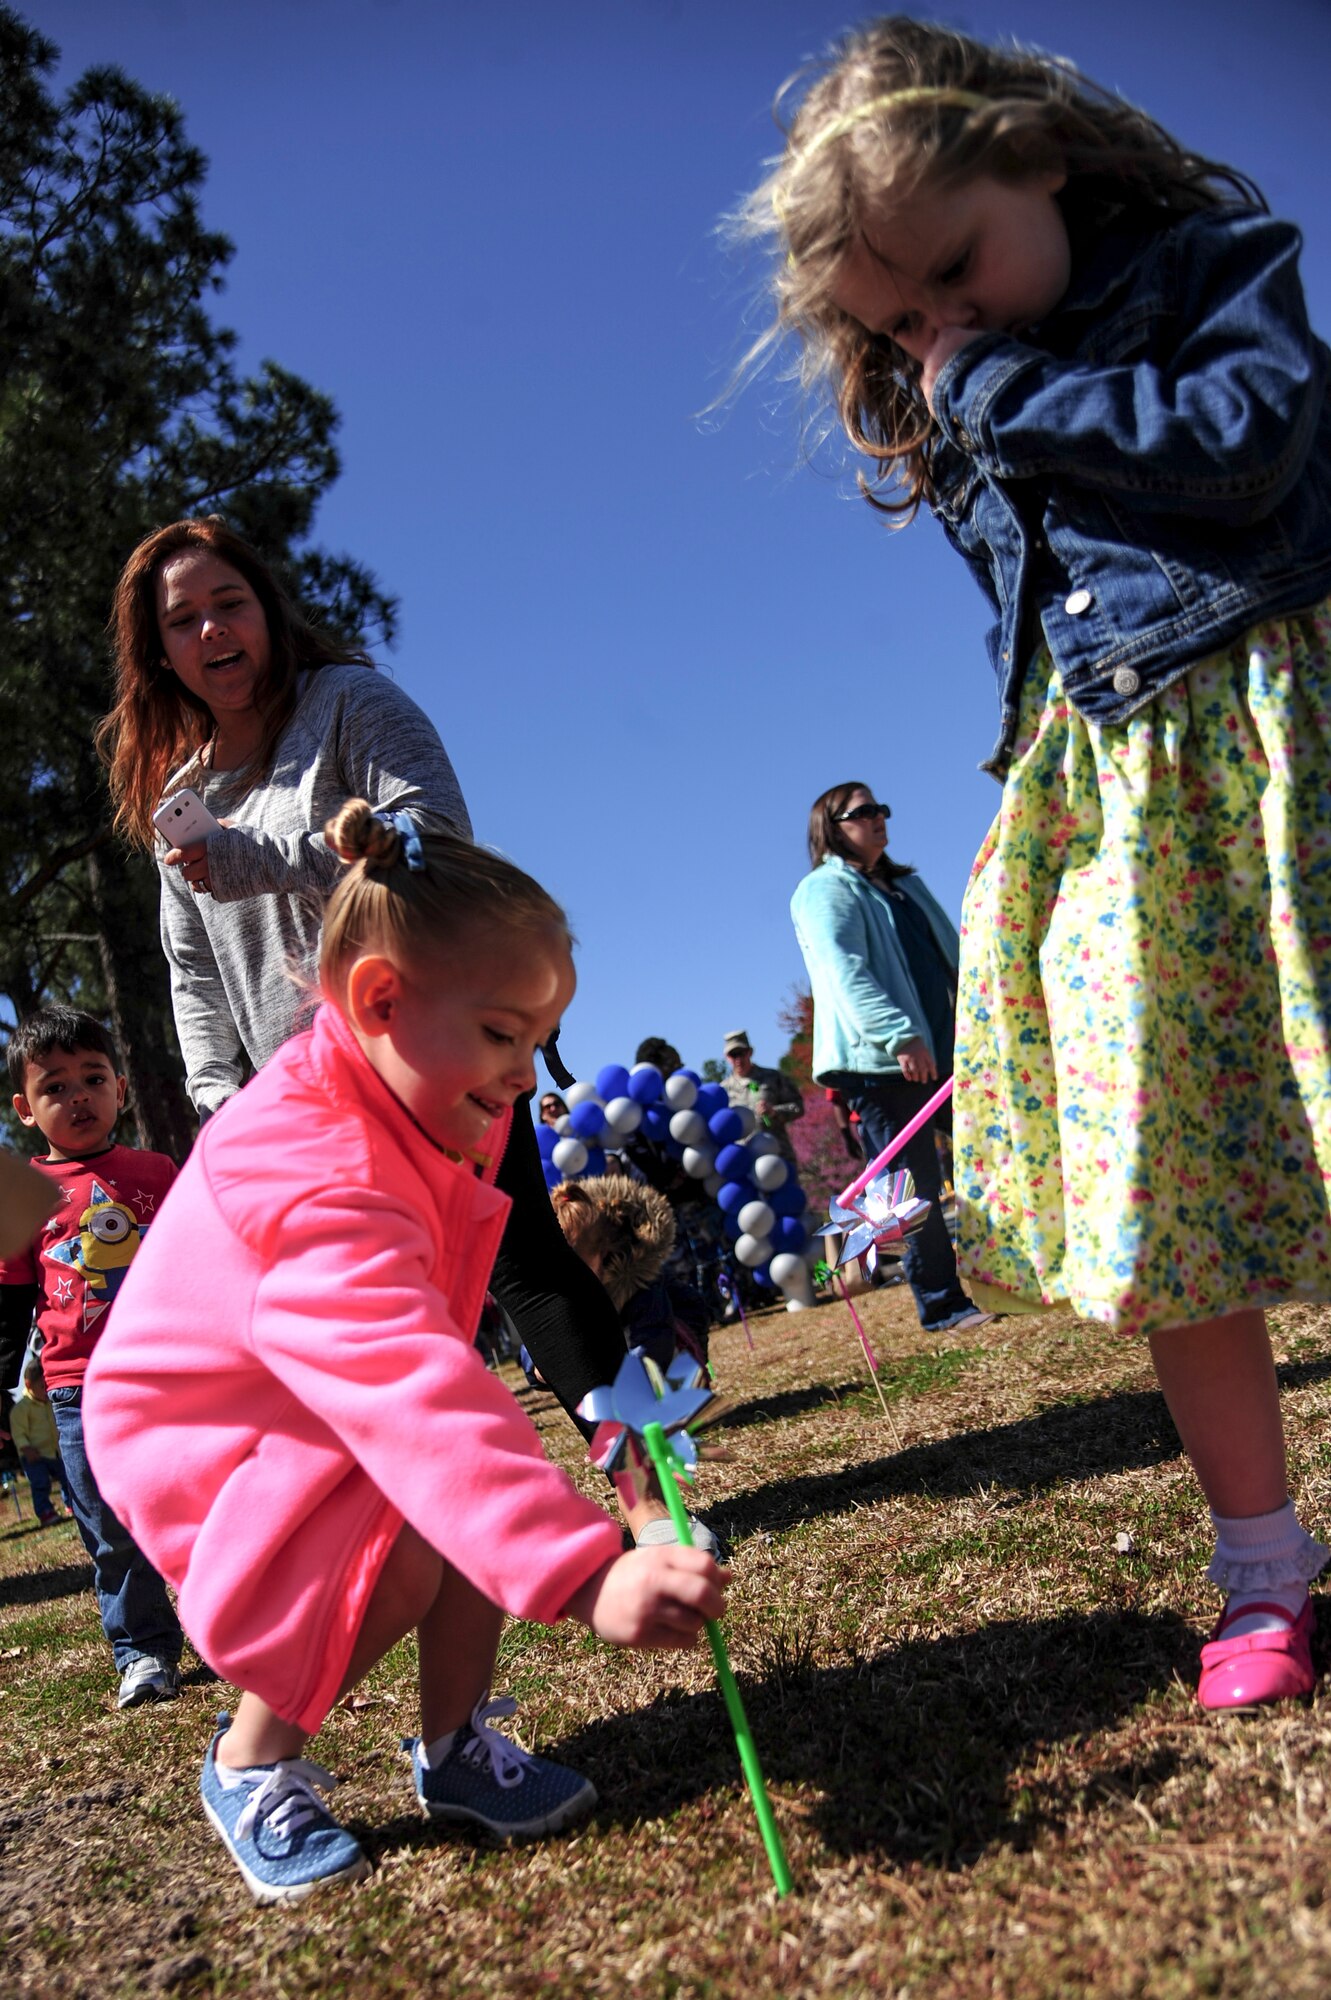 Children of Team Seymour plant pinwheels during a “Pinwheels for Child Abuse Prevention” event, April 1, 2015, at Seymour Johnson Air Force Base, North Carolina. Every April is recognized as Child Abuse Prevention Month and acknowledges the importance of families and communities working together to prevent child abuse and neglect. (U.S Air Force photo/Senior Airman Brittain Crolley)